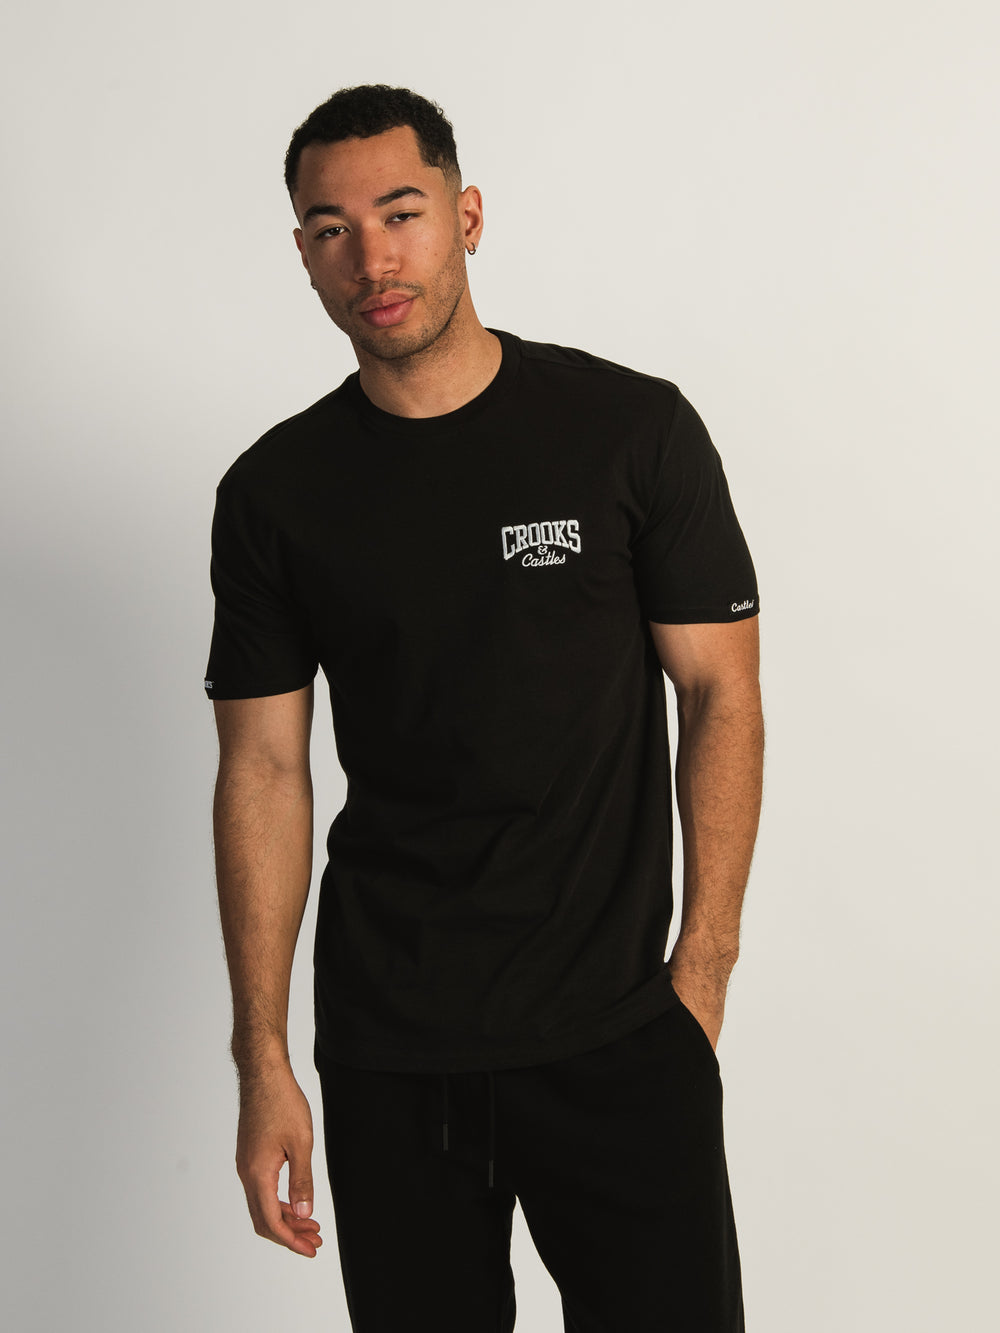 CROOKS & CASTLES EMBROIDERED T-SHIRT